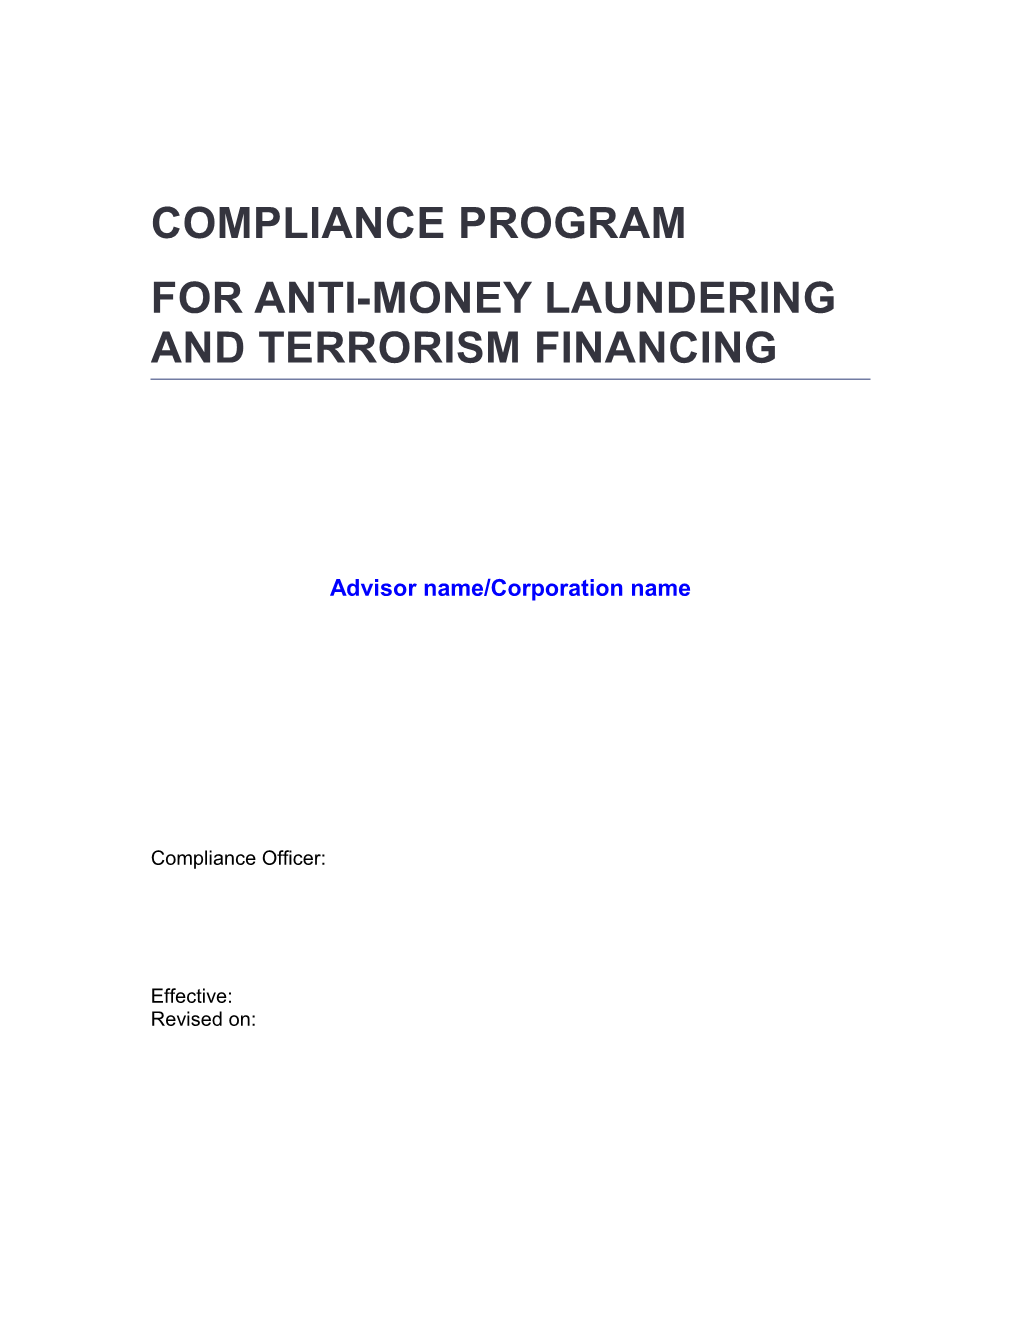 It Is Important to Note That This Compliance Program Template Constitutes a Guide to The